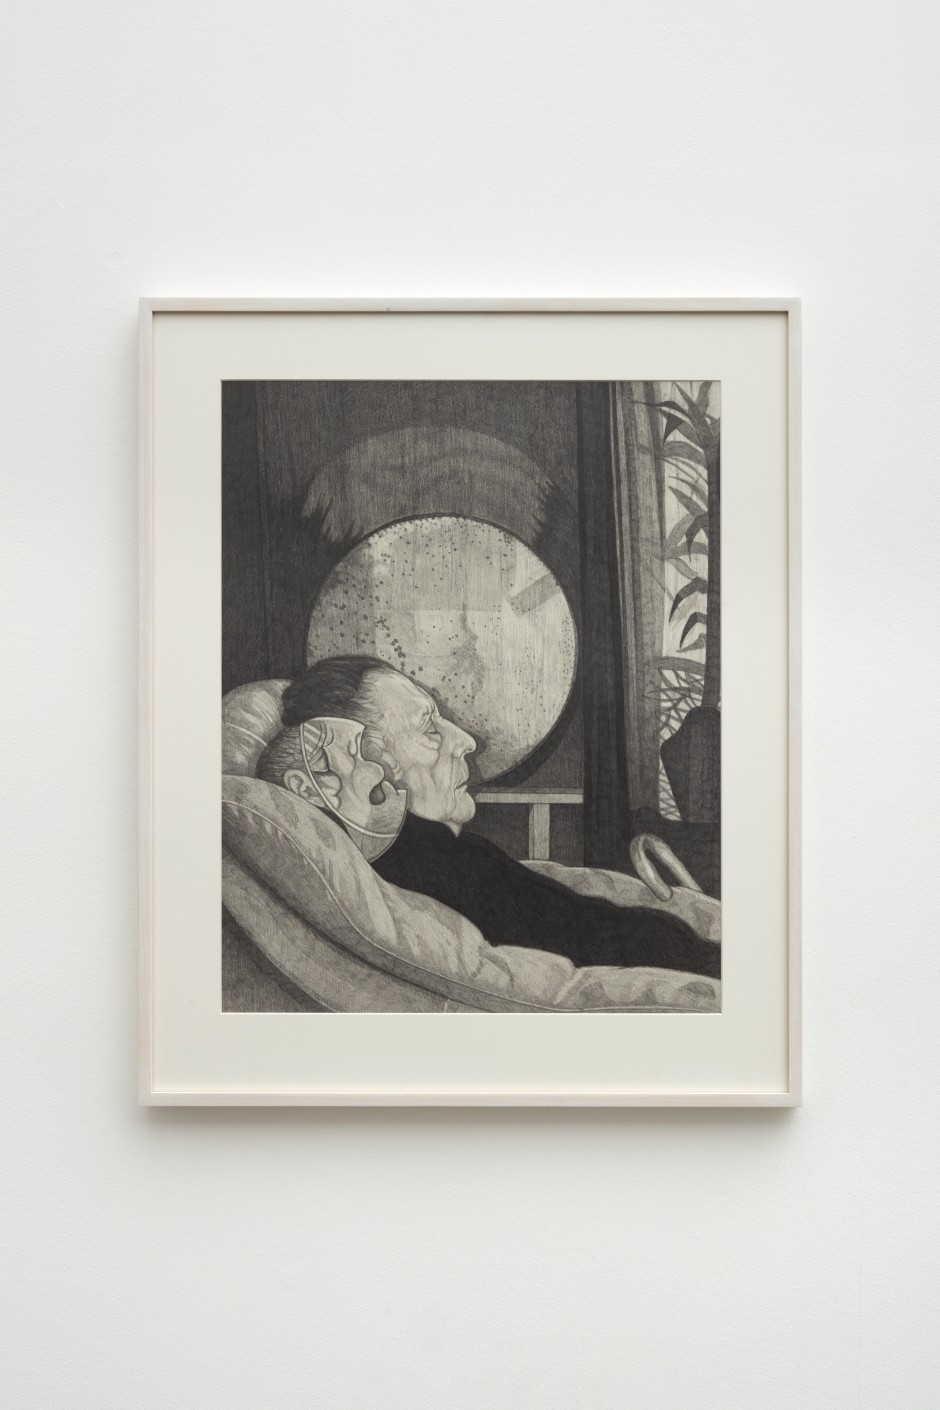 Paul Anthony Harford  Untitled (Mother asleep with masked child), ca. 1999  graphite on paper  site size: 61 x 49 cm / 24 ⅛ x 19 ¼ in frame size: 76.5 x 63.5 x 3.8 cm / 30 ⅛ x 25 x 1 ½ in  Paul Anthony Harford (1943-2016) trained at Byam Shaw School of Art in London as a mature student in the late 1960s, before moving to Southend – a sea-side town on England’s Southeast coast. Harford lived at different times in Southend and Weymouth, and worked variously as a schoolmaster, cleaner, bin man and hospital porter. Over the course of his life, he completed hundreds of drawings – virtually all of them in pencil and graphite stick – which he kept stacked around the walls of his attic studio. Only a small fraction of these survive. Within and between drawings, Harford moved between social realism – capturing and caricaturing fragments of reality – and wry, wayward surrealism.  Characterised by a minutely detailed style and subtle tonal range, Harford’s drawings frequently evoke the life and atmosphere of the seaside towns in which he lived: promenades, pubs and pavilions serve as the backdrops to scenes of becalmed existence. Often, an air of desolation or ennui prevails.  Harford’s drawings of his mother show her seated and contemplative, or frail and asleep during her final days, as we see in this drawing Untitled (Mother asleep with masked child), ca. 1999. His forensic attention to surface detail – seen in the play of light across her sleeping face – poignantly amplifies the sense of mortality in these images.